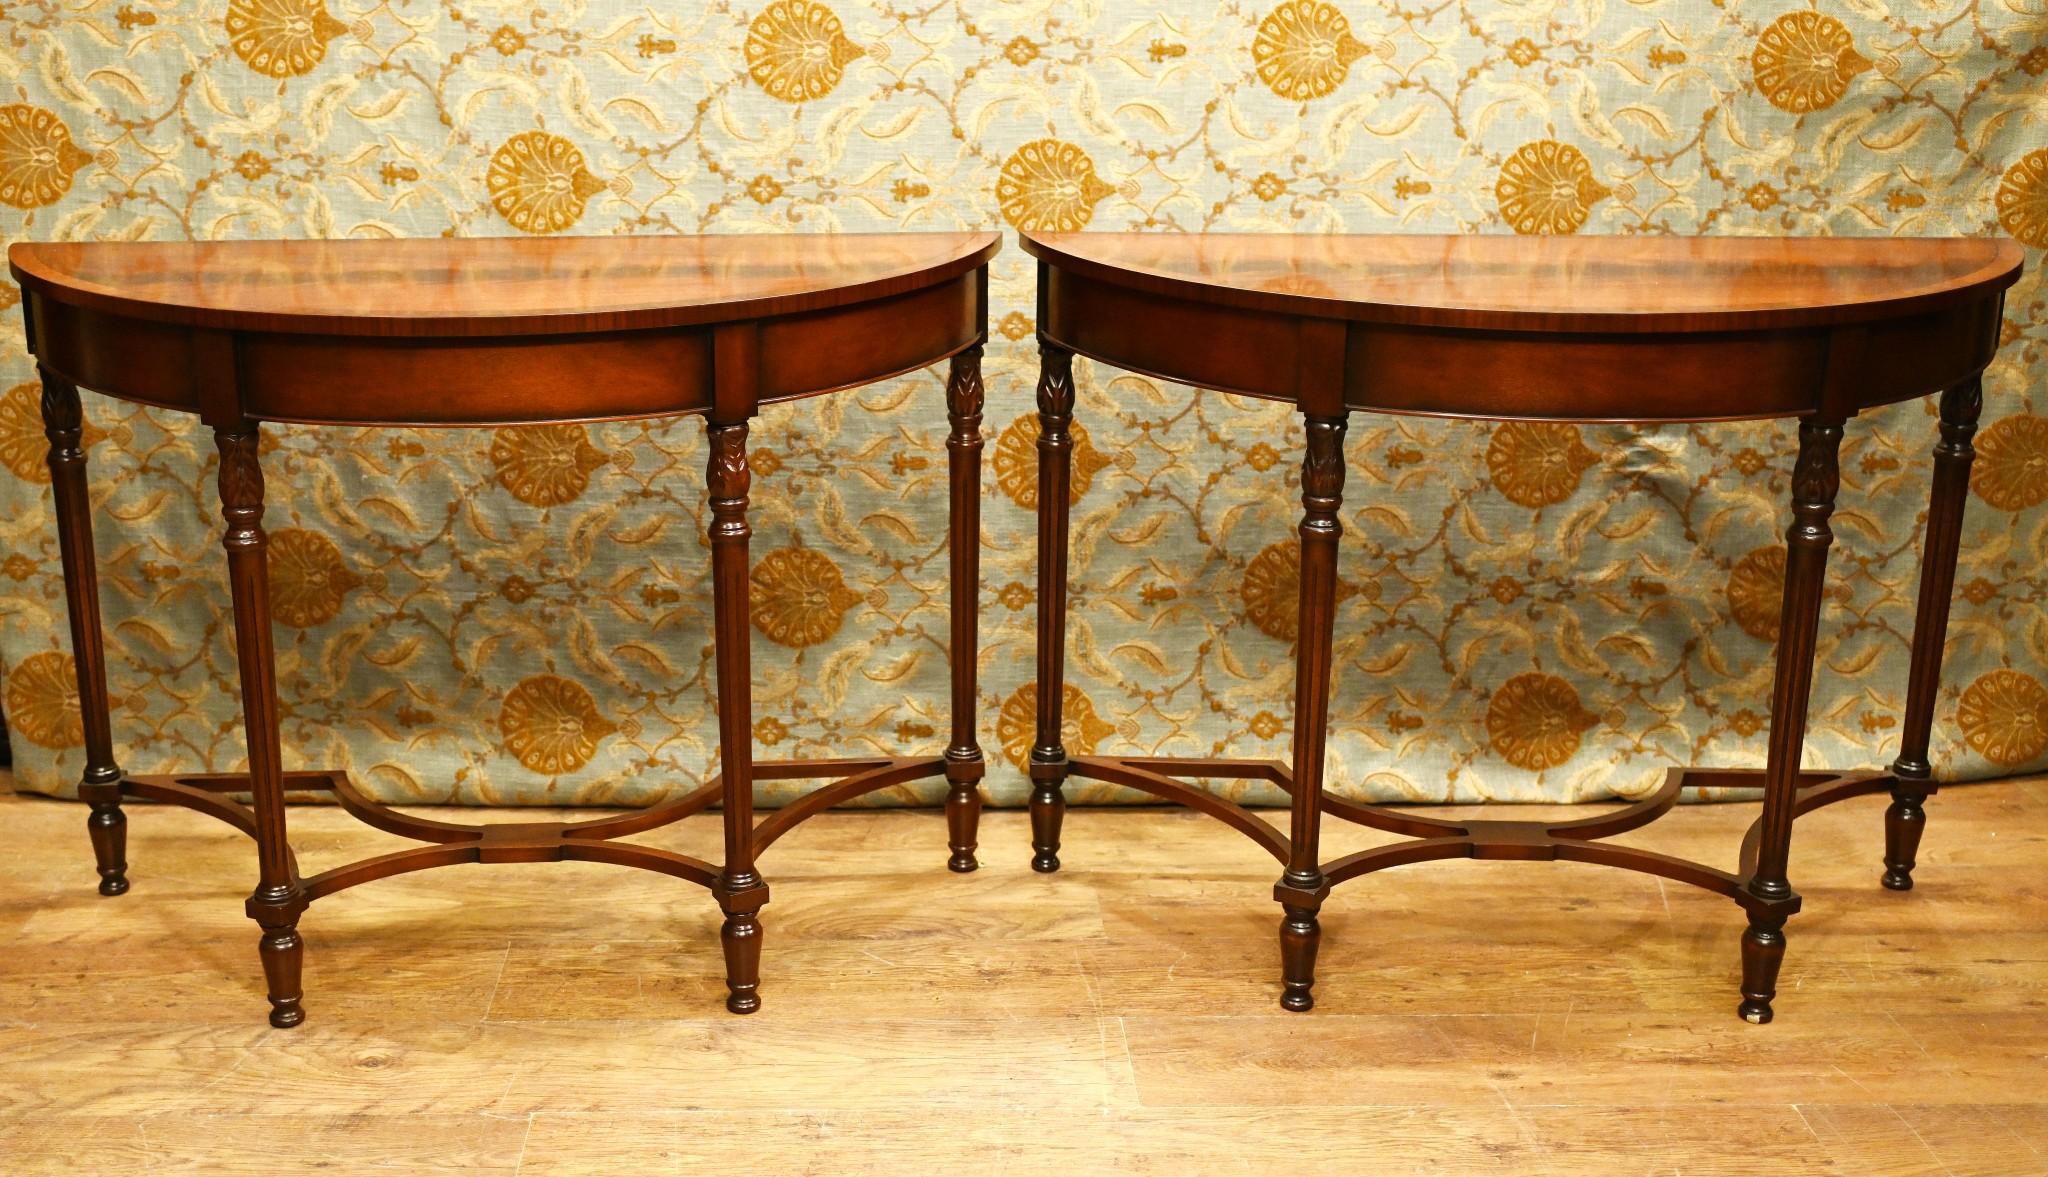 Pair of stylish Regency revival console tables in mahogany
Features an intricately designed stretcher base
Sumptuous mahogany has a lovely patina
Demi lune - half moon - form in the classic style
We can split the pair up if you just require a single